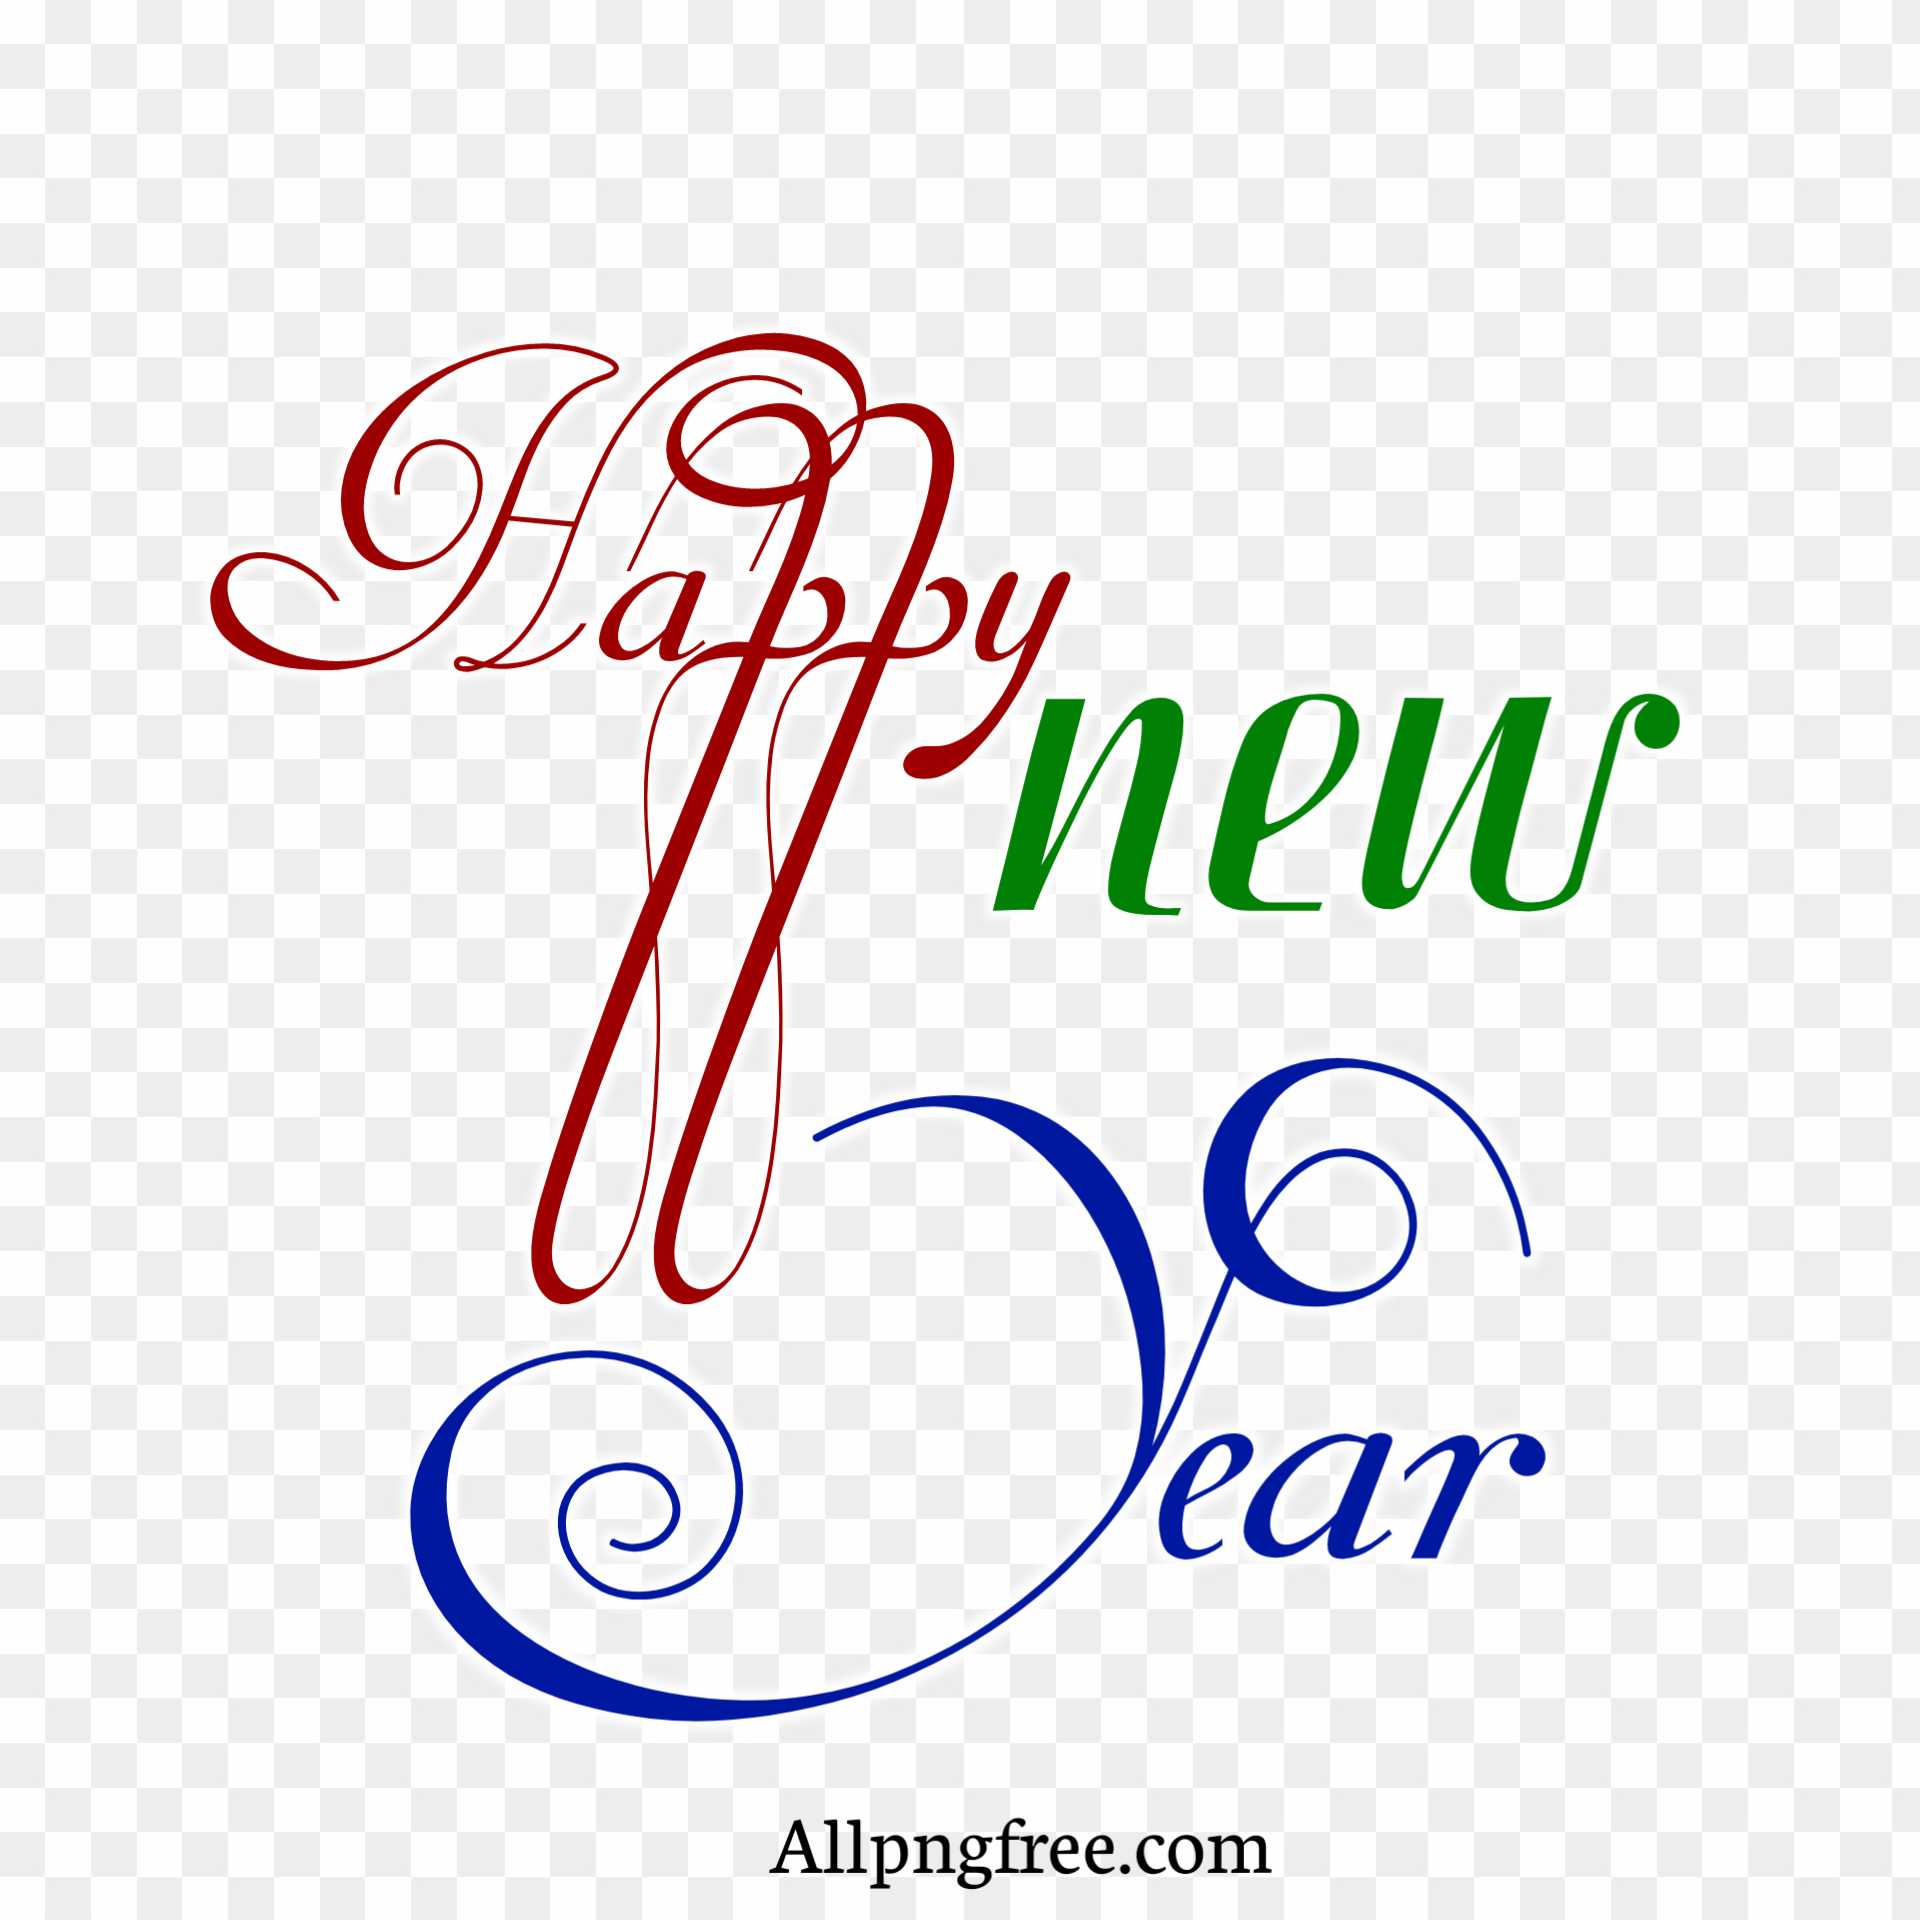 Stylist happy new year text PNG download